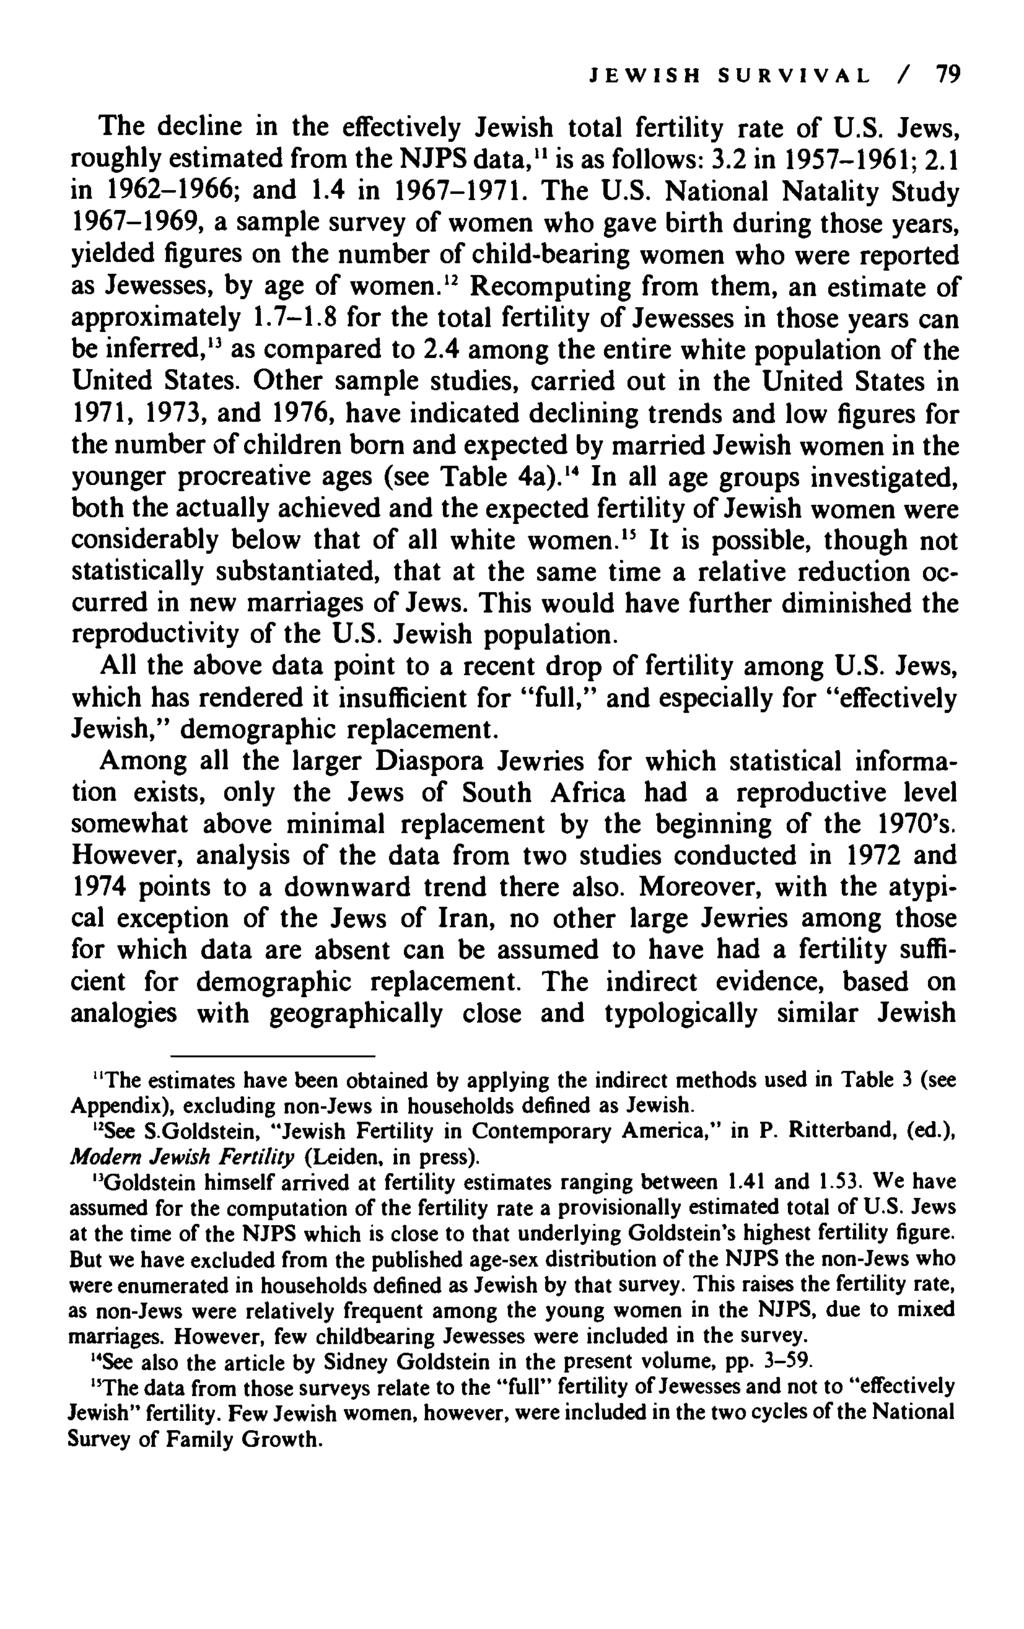 JEWISH SURVIVAL / 79 The decline in the effectively Jewish total fertility rate of U.S. Jews, roughly estimated from the NJPS data," is as follows: 3.2 in 1957-1961; 2.1 in 1962-1966; and 1.